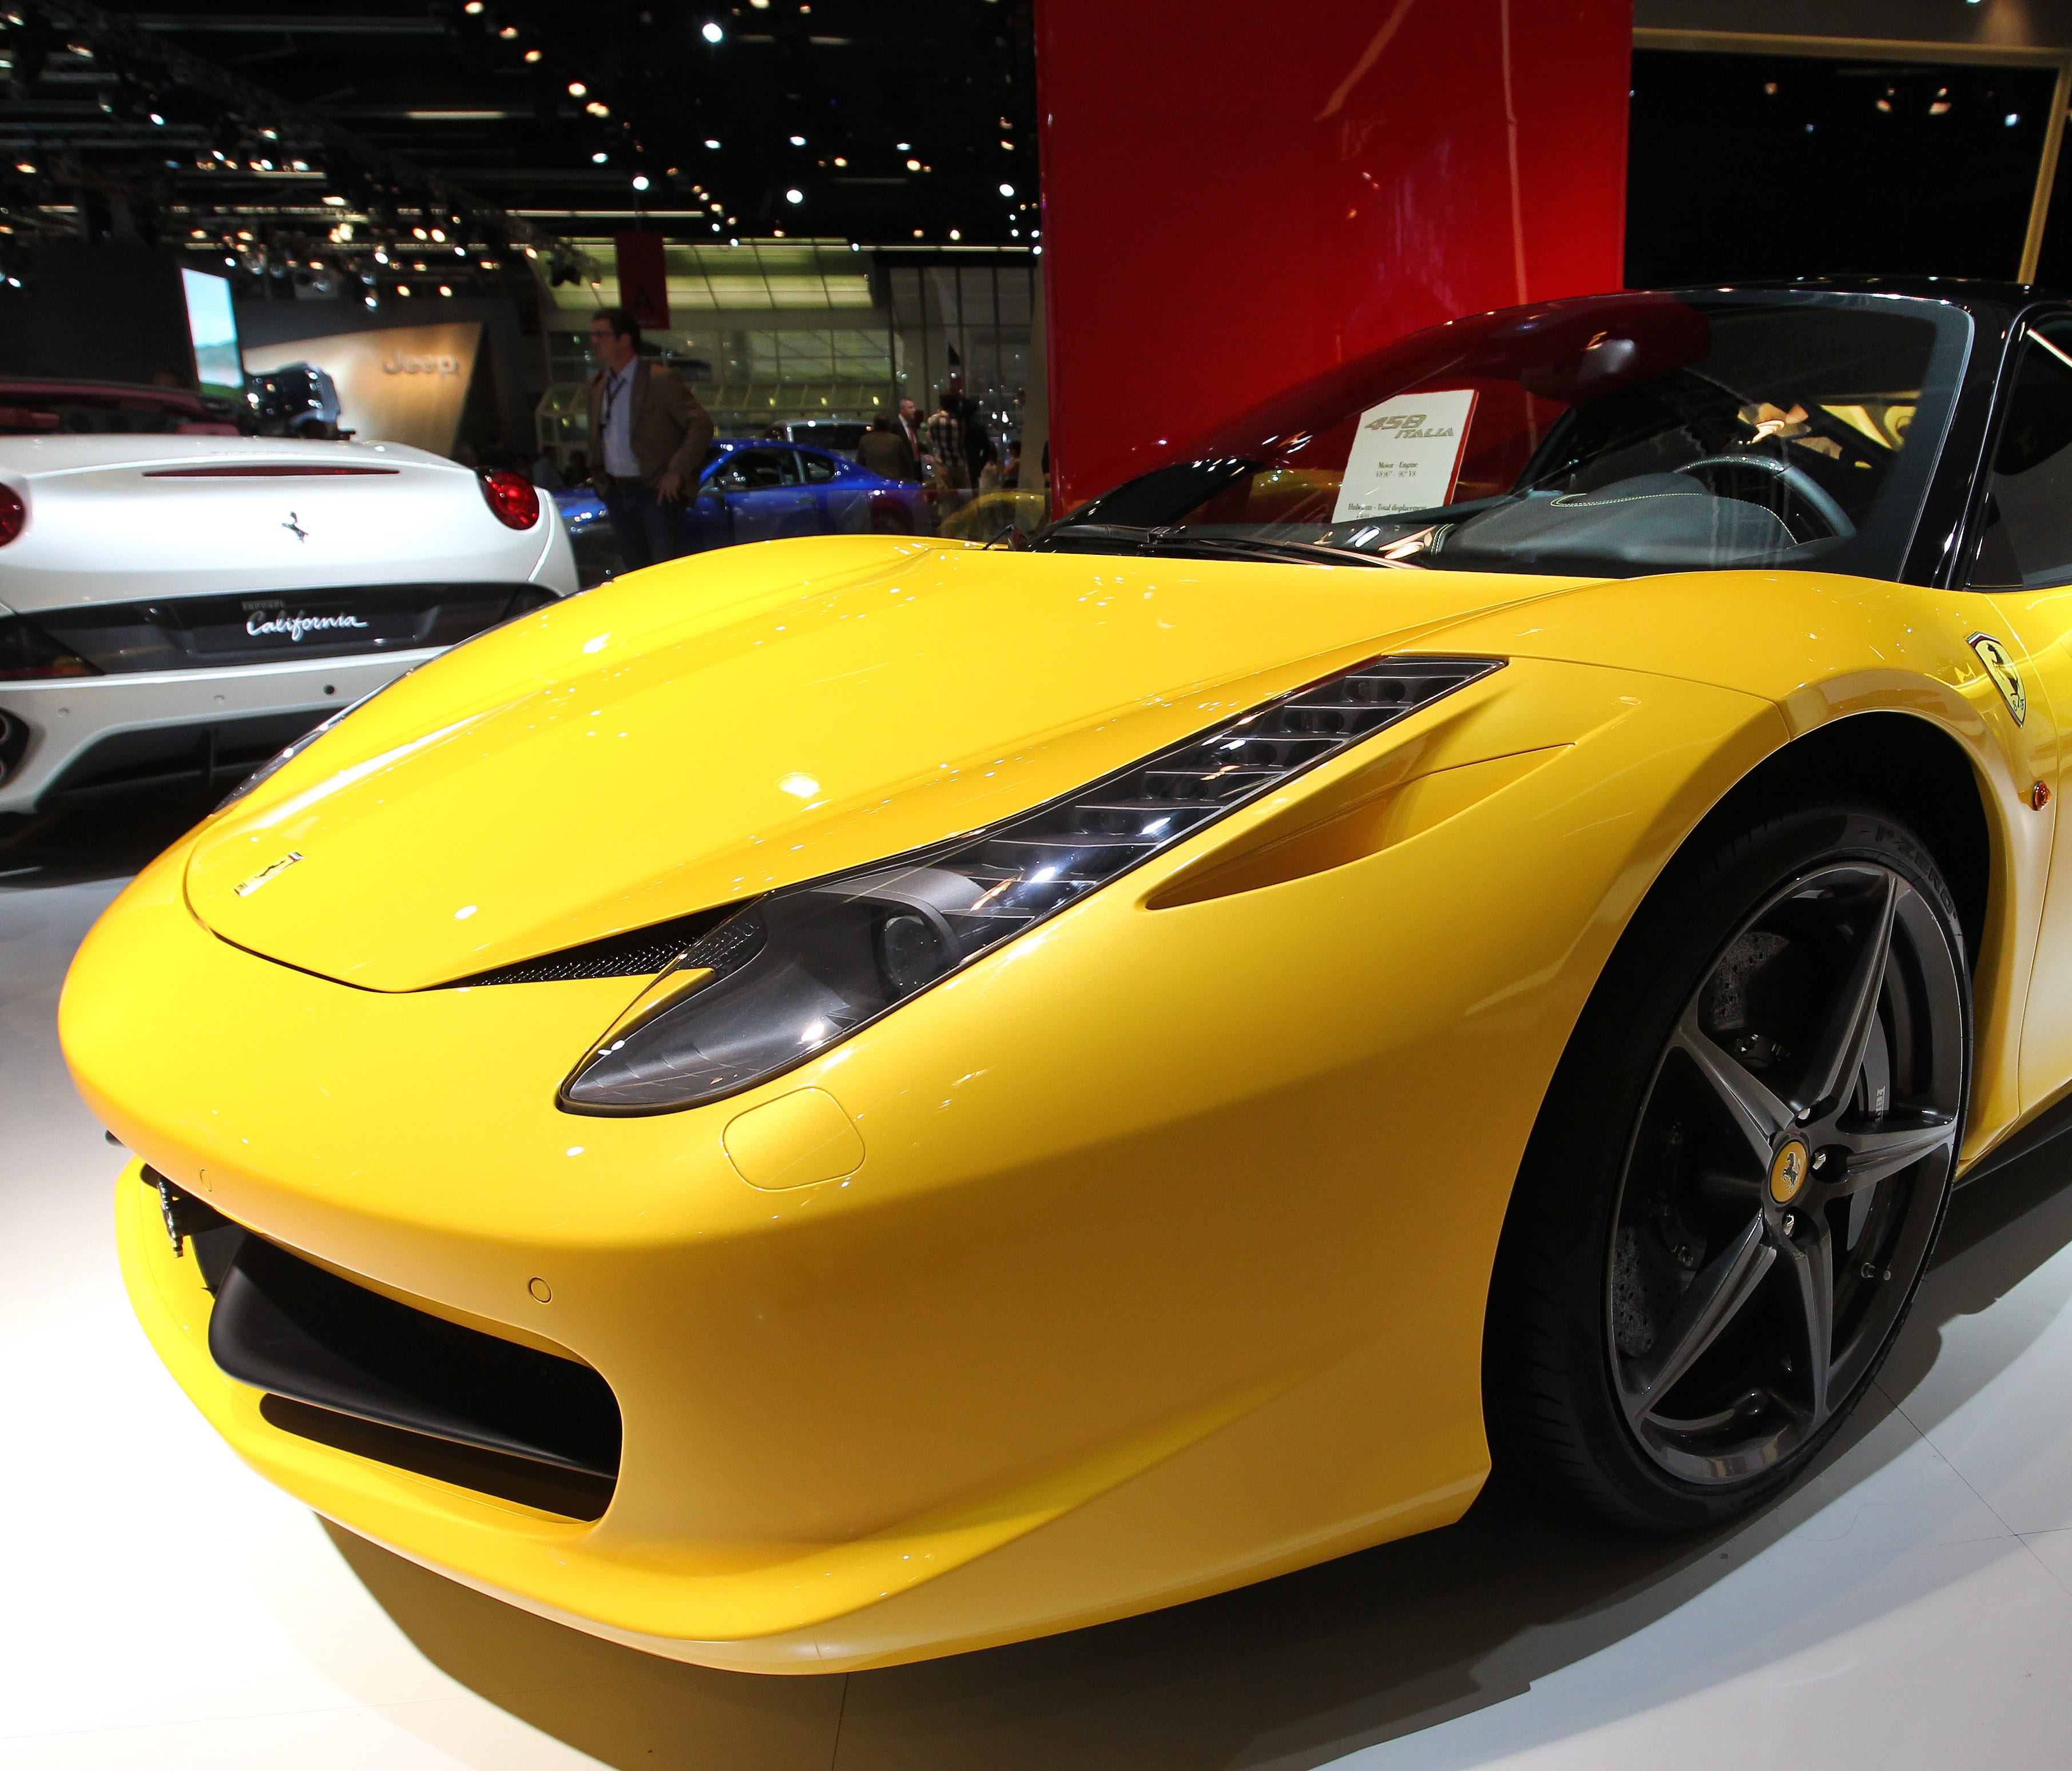 A Ferrari 458 Italia car on display at the international motor show IAA in Frankfurt, Germany, Sept. 14, 2011. Florida attorney James Fowler's says his 2014 Ferrari 458 Italia Spider was given to the wrong person by a hotel valet. a convertible and a